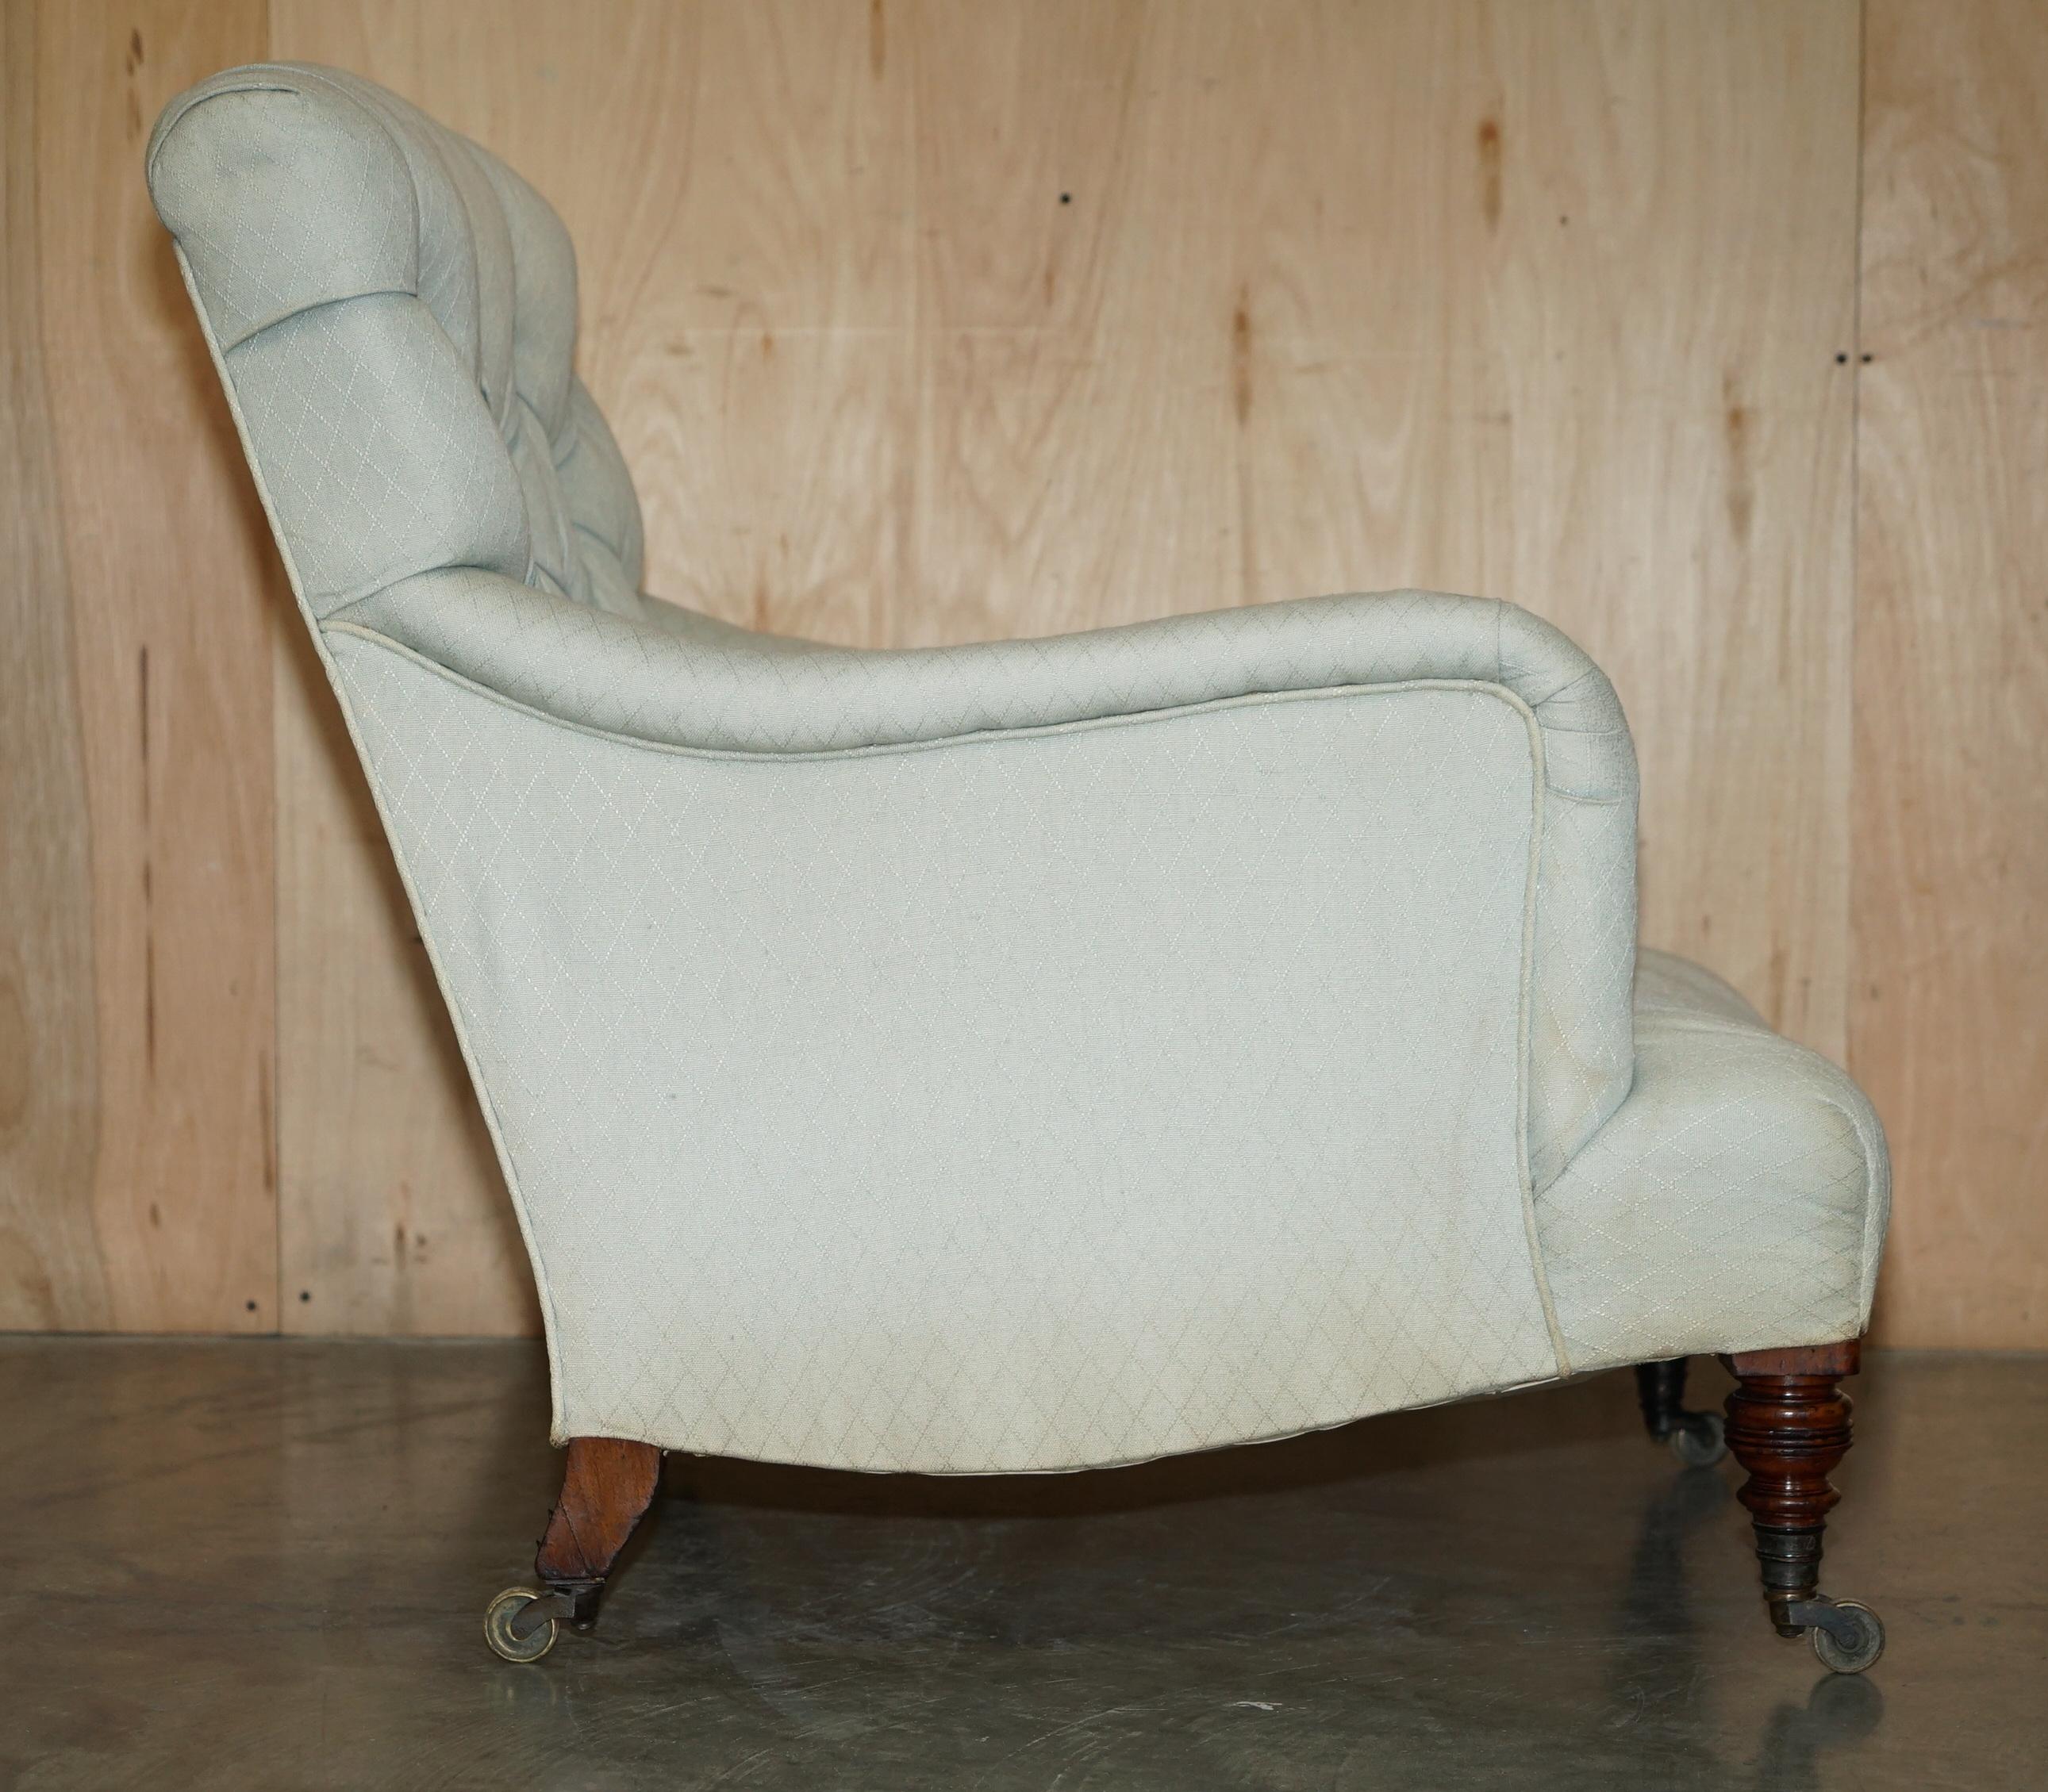 RARE ORIGINAL ViCTORIAN HOWARD & SONS BRIDGEWATER ARMCHAIR PERIOD UPHOLSTERY For Sale 3